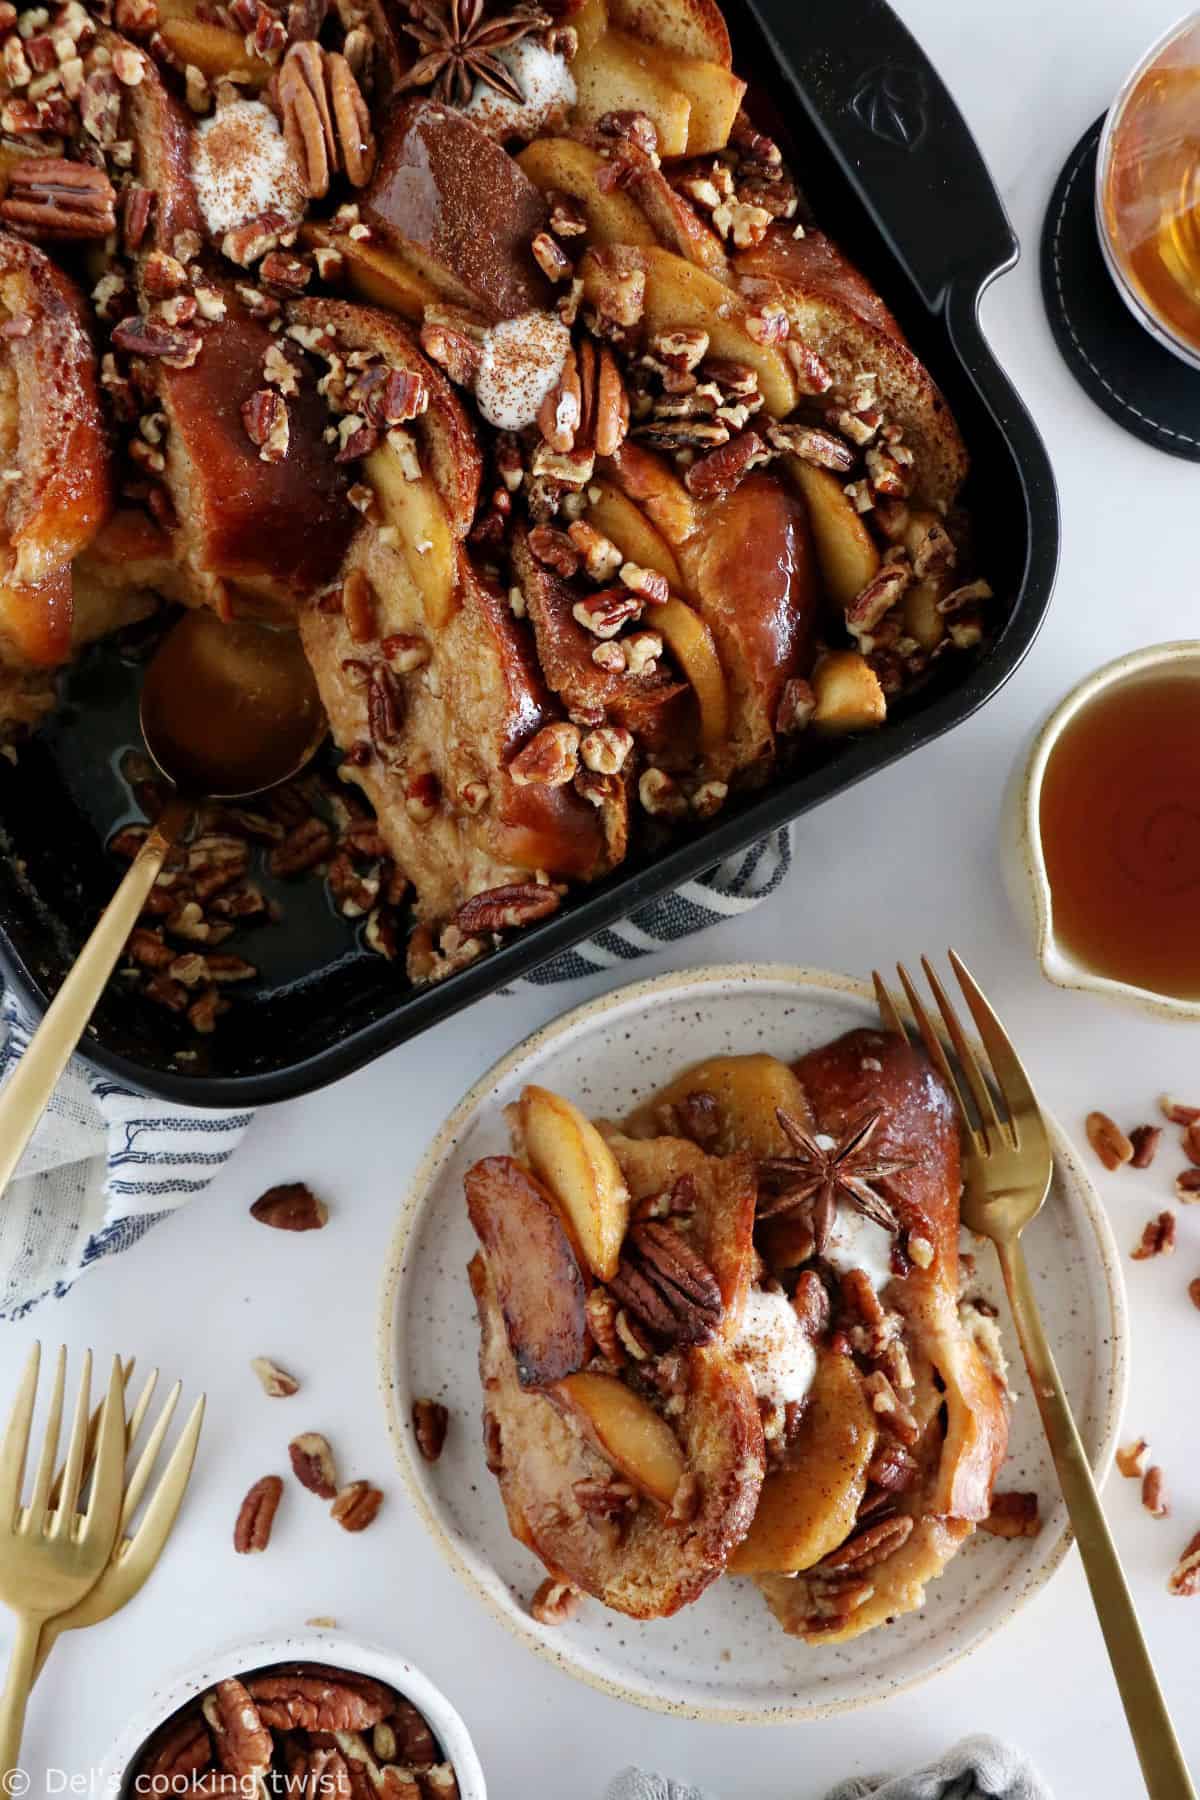 Baked Apple Pecan French Toast is the ultimate family breakfast, just perfect to feed a crowd. Both soft and crunchy, it features some thick challah bread slices, baked apples with a splash of whiskey, and an irresistible pecan-sugar mixture.